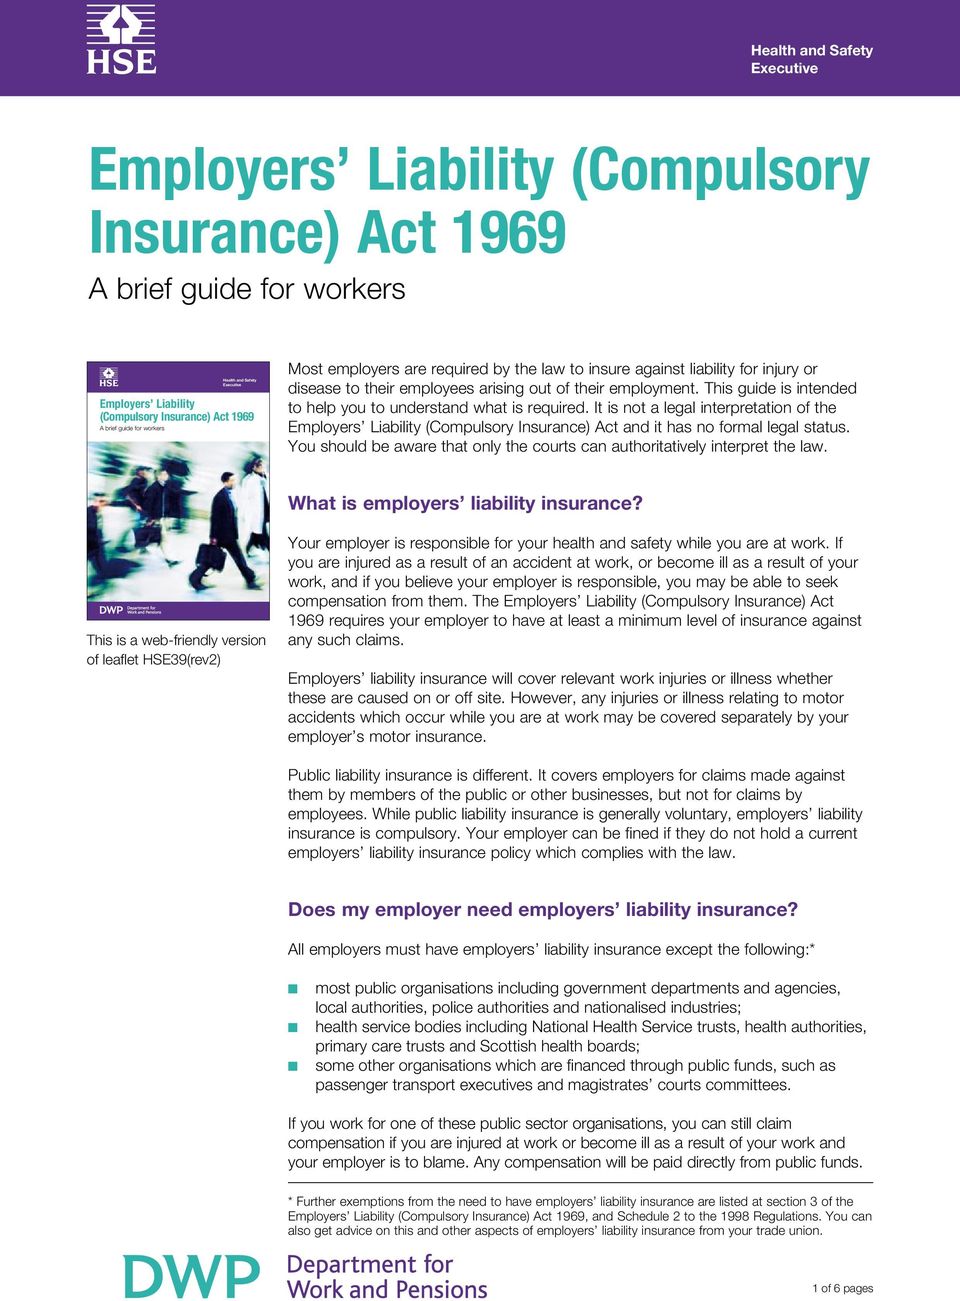 It is not a legal interpretation of the Employers Liability (Compulsory Insurance) Act and it has no formal legal status.